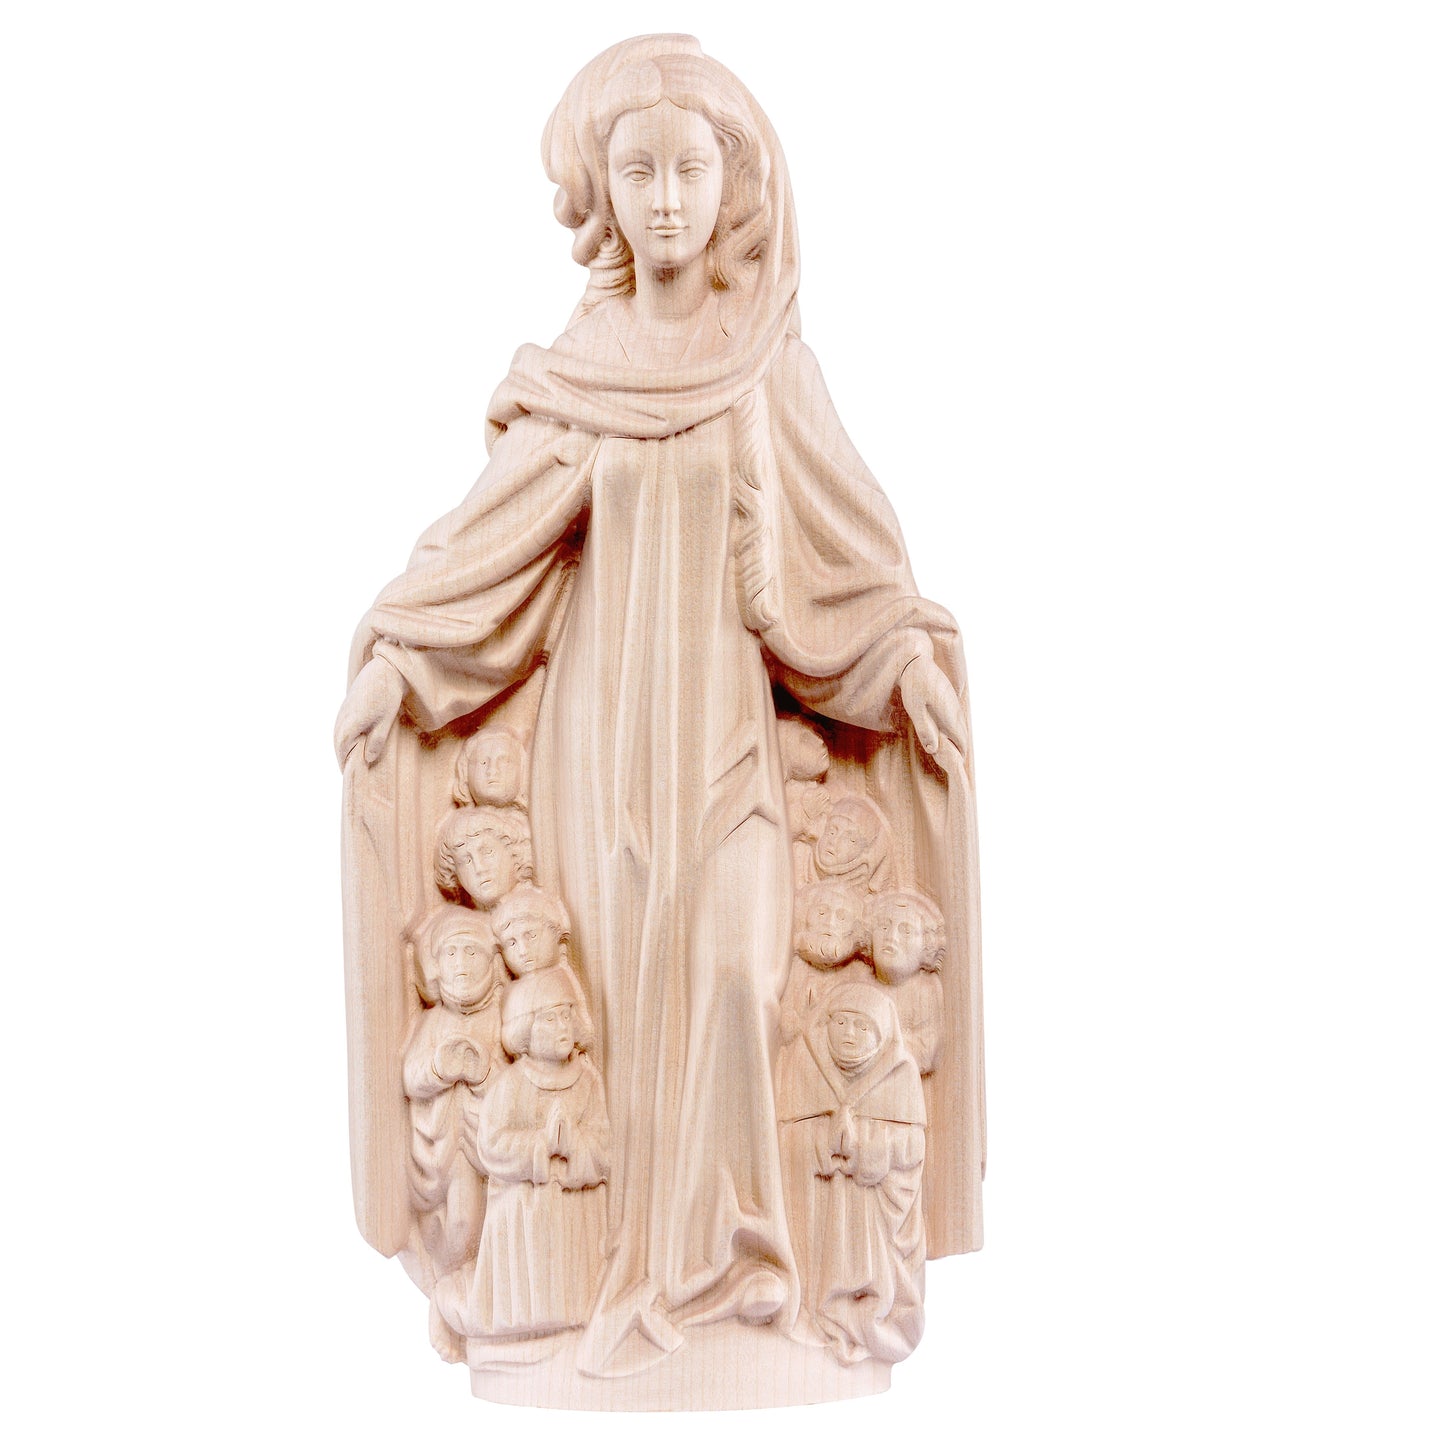 MONDO CATTOLICO Natural / 13 cm (5.1 in) Wooden statue of Madonna of protective cloak